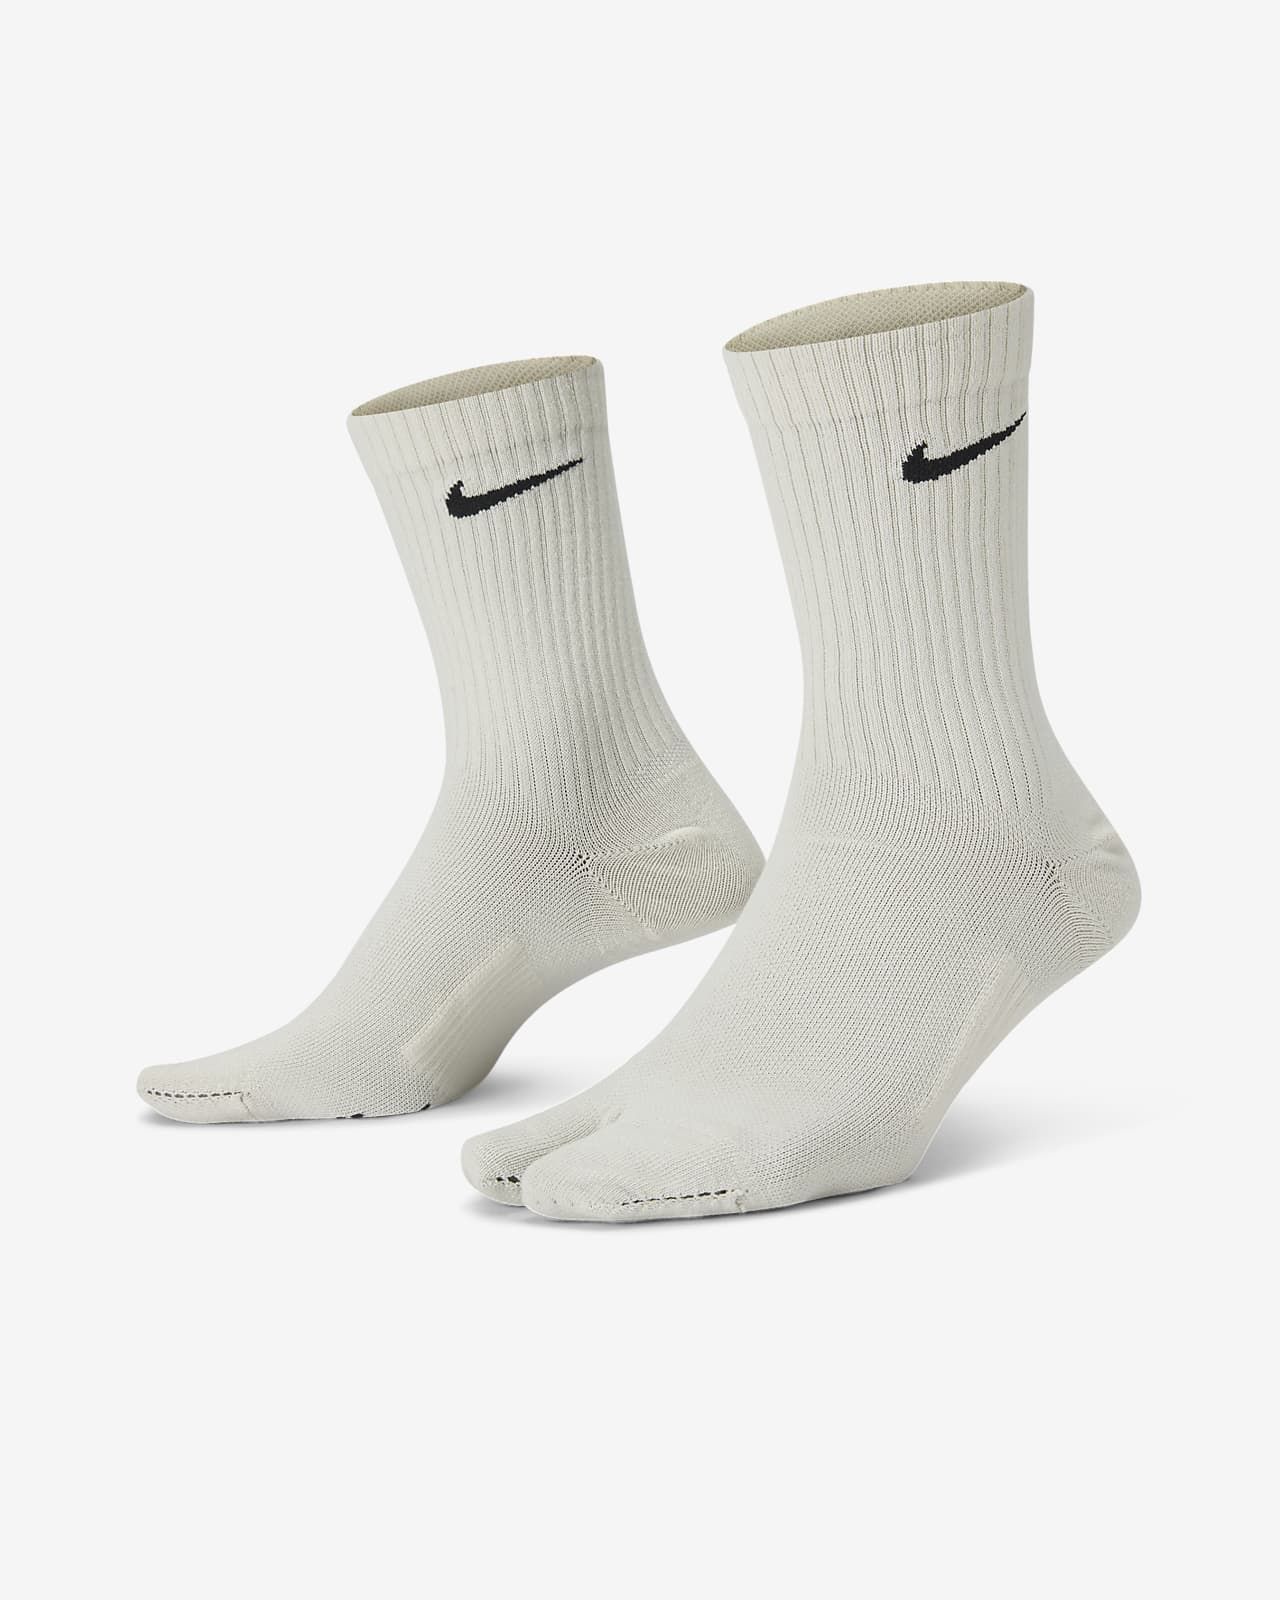 https://static.nike.com/a/images/t_PDP_1280_v1/f_auto,q_auto:eco/2ead5fa2-e1b1-4af6-aabe-dcb8402fae9a/chaussettes-mi-mollet-everyday-plus-lightweight-rcGCsw.png